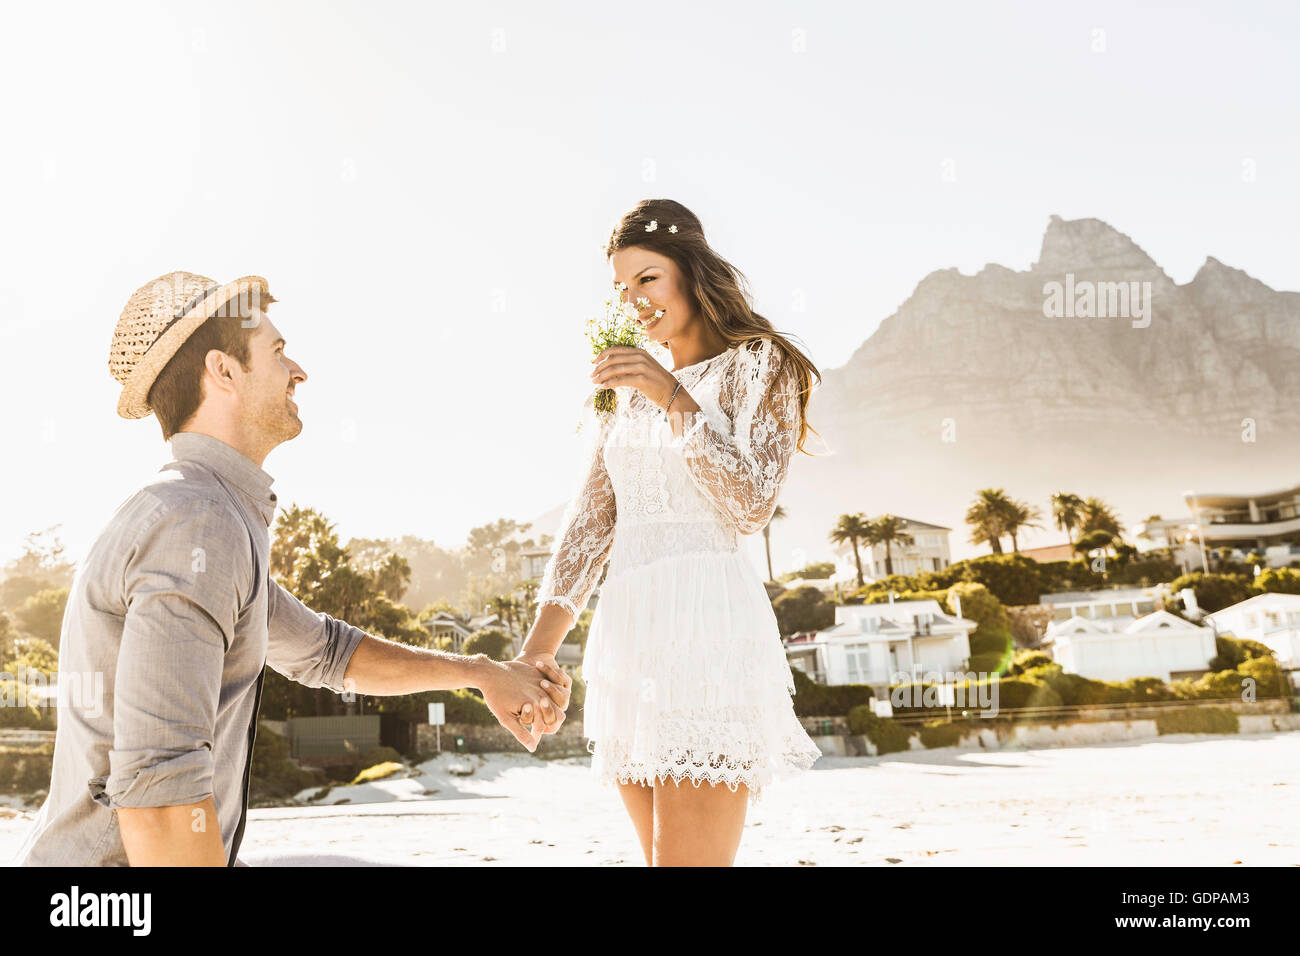 Man on one knee proposing to girlfriend on beach, Cape Town, South Africa Stock Photo